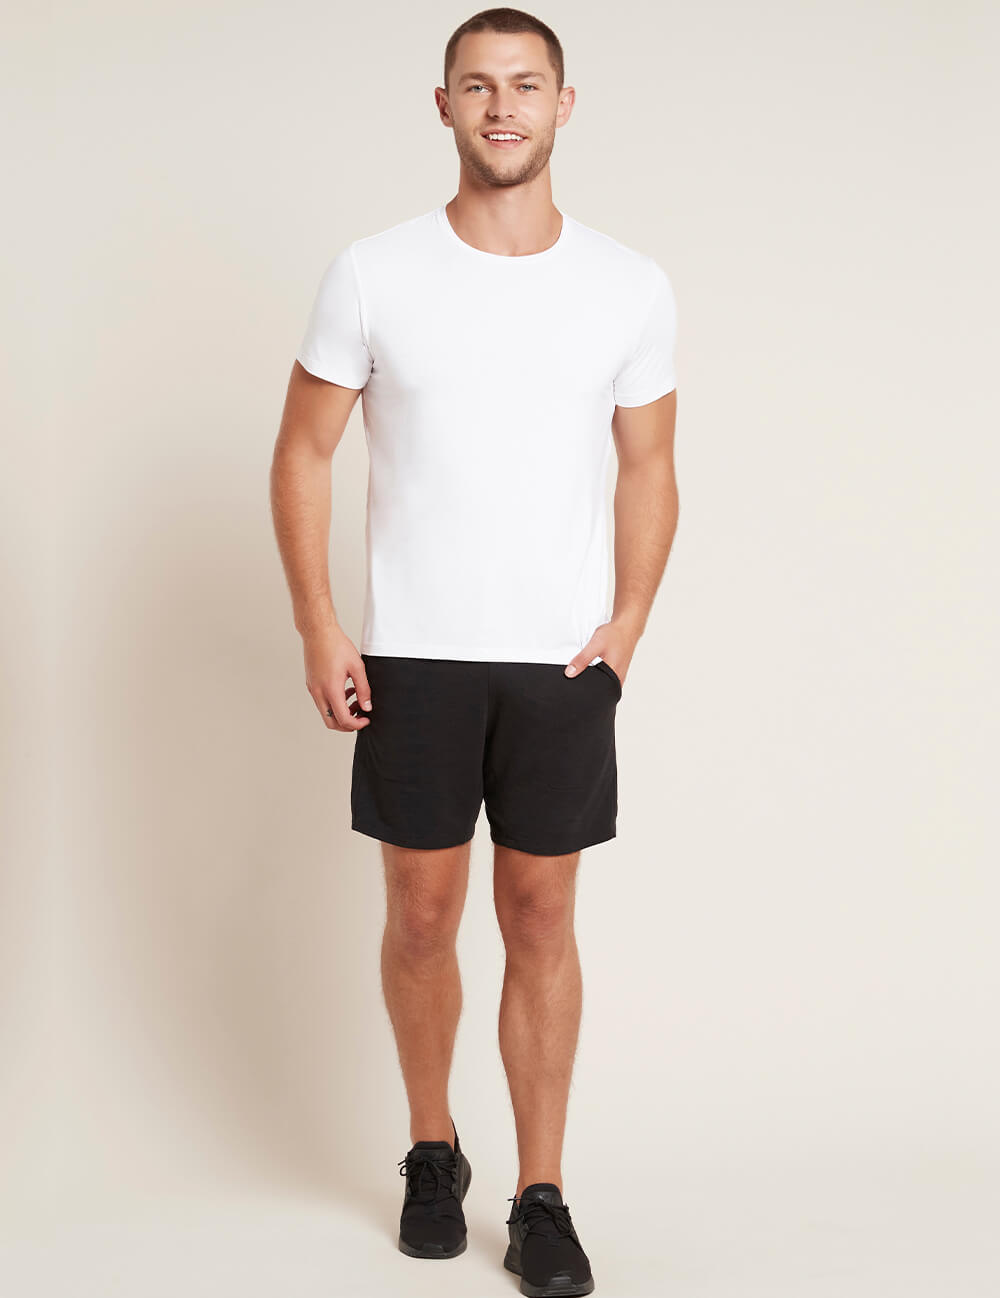 Mens-Active-Muscle-Tee-White-Front-3.jpg